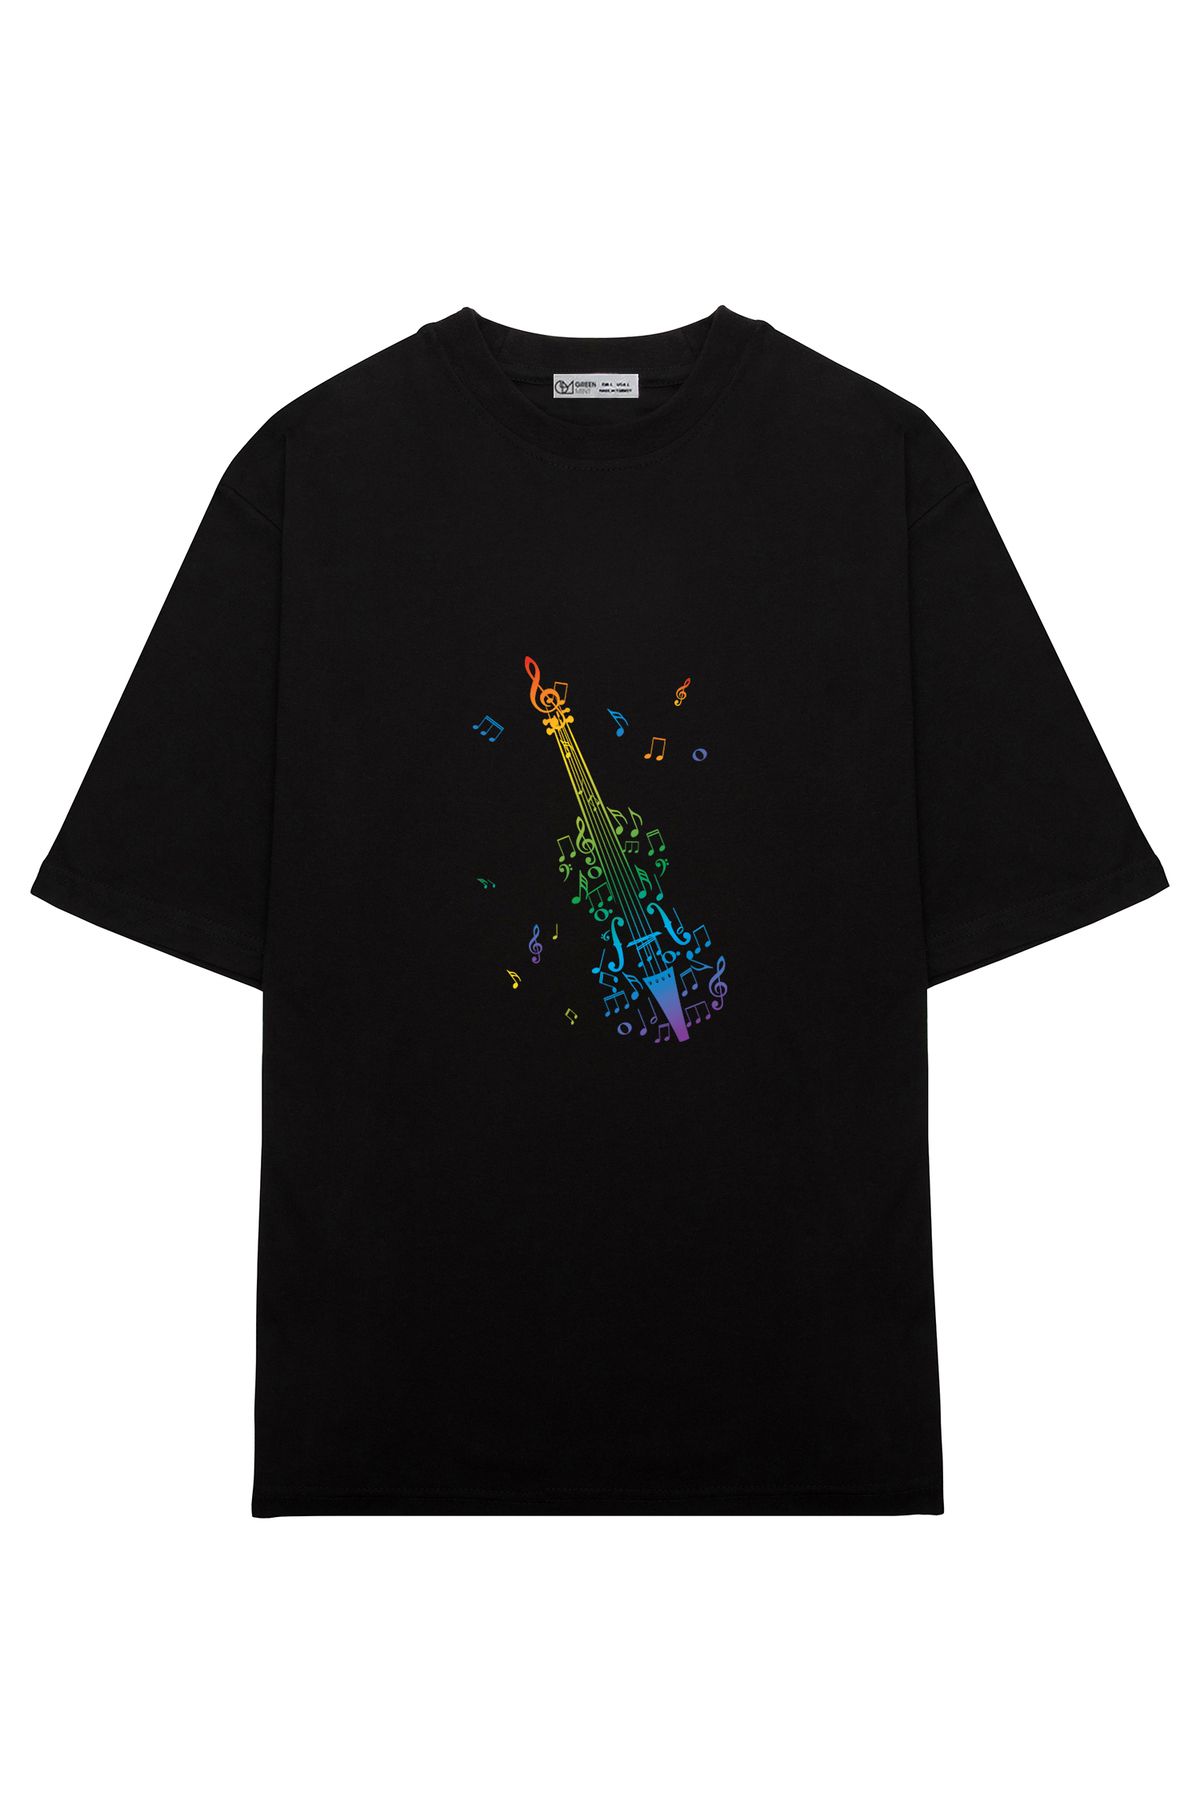 GreenMint Unisex Oversize Rainbow silhouette of violin with music